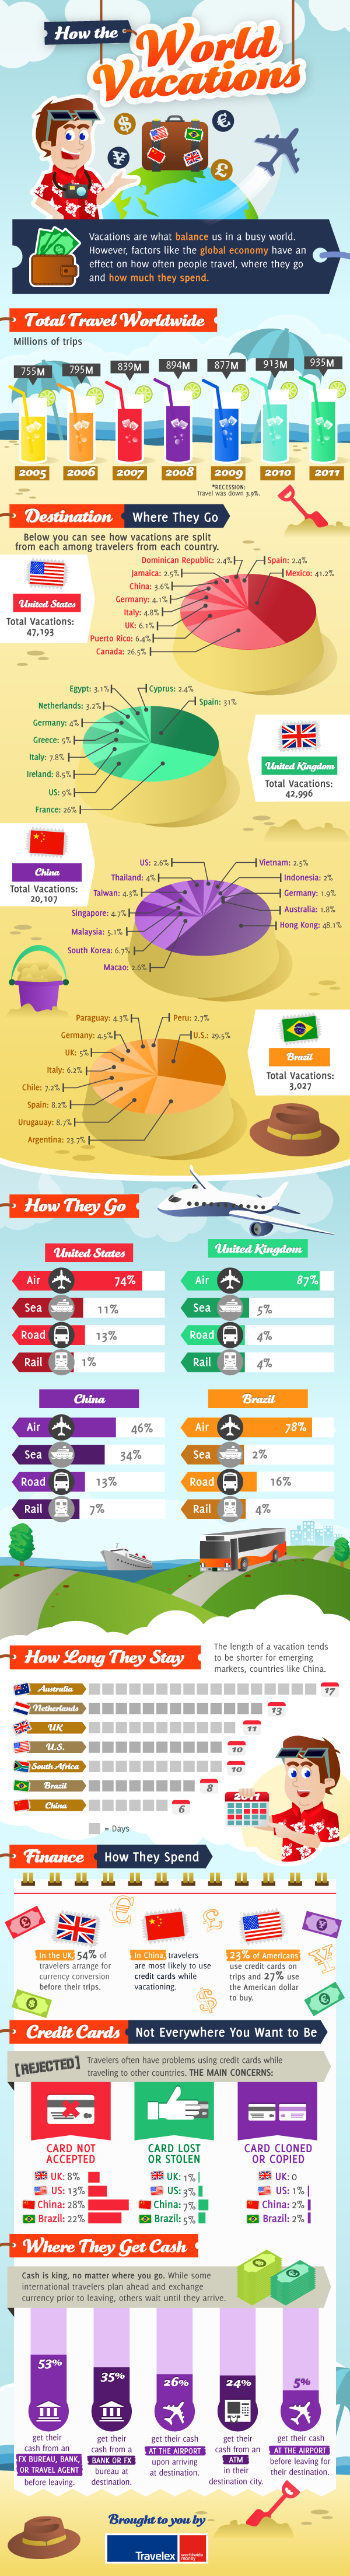 How-The-World-Vacations-infographic